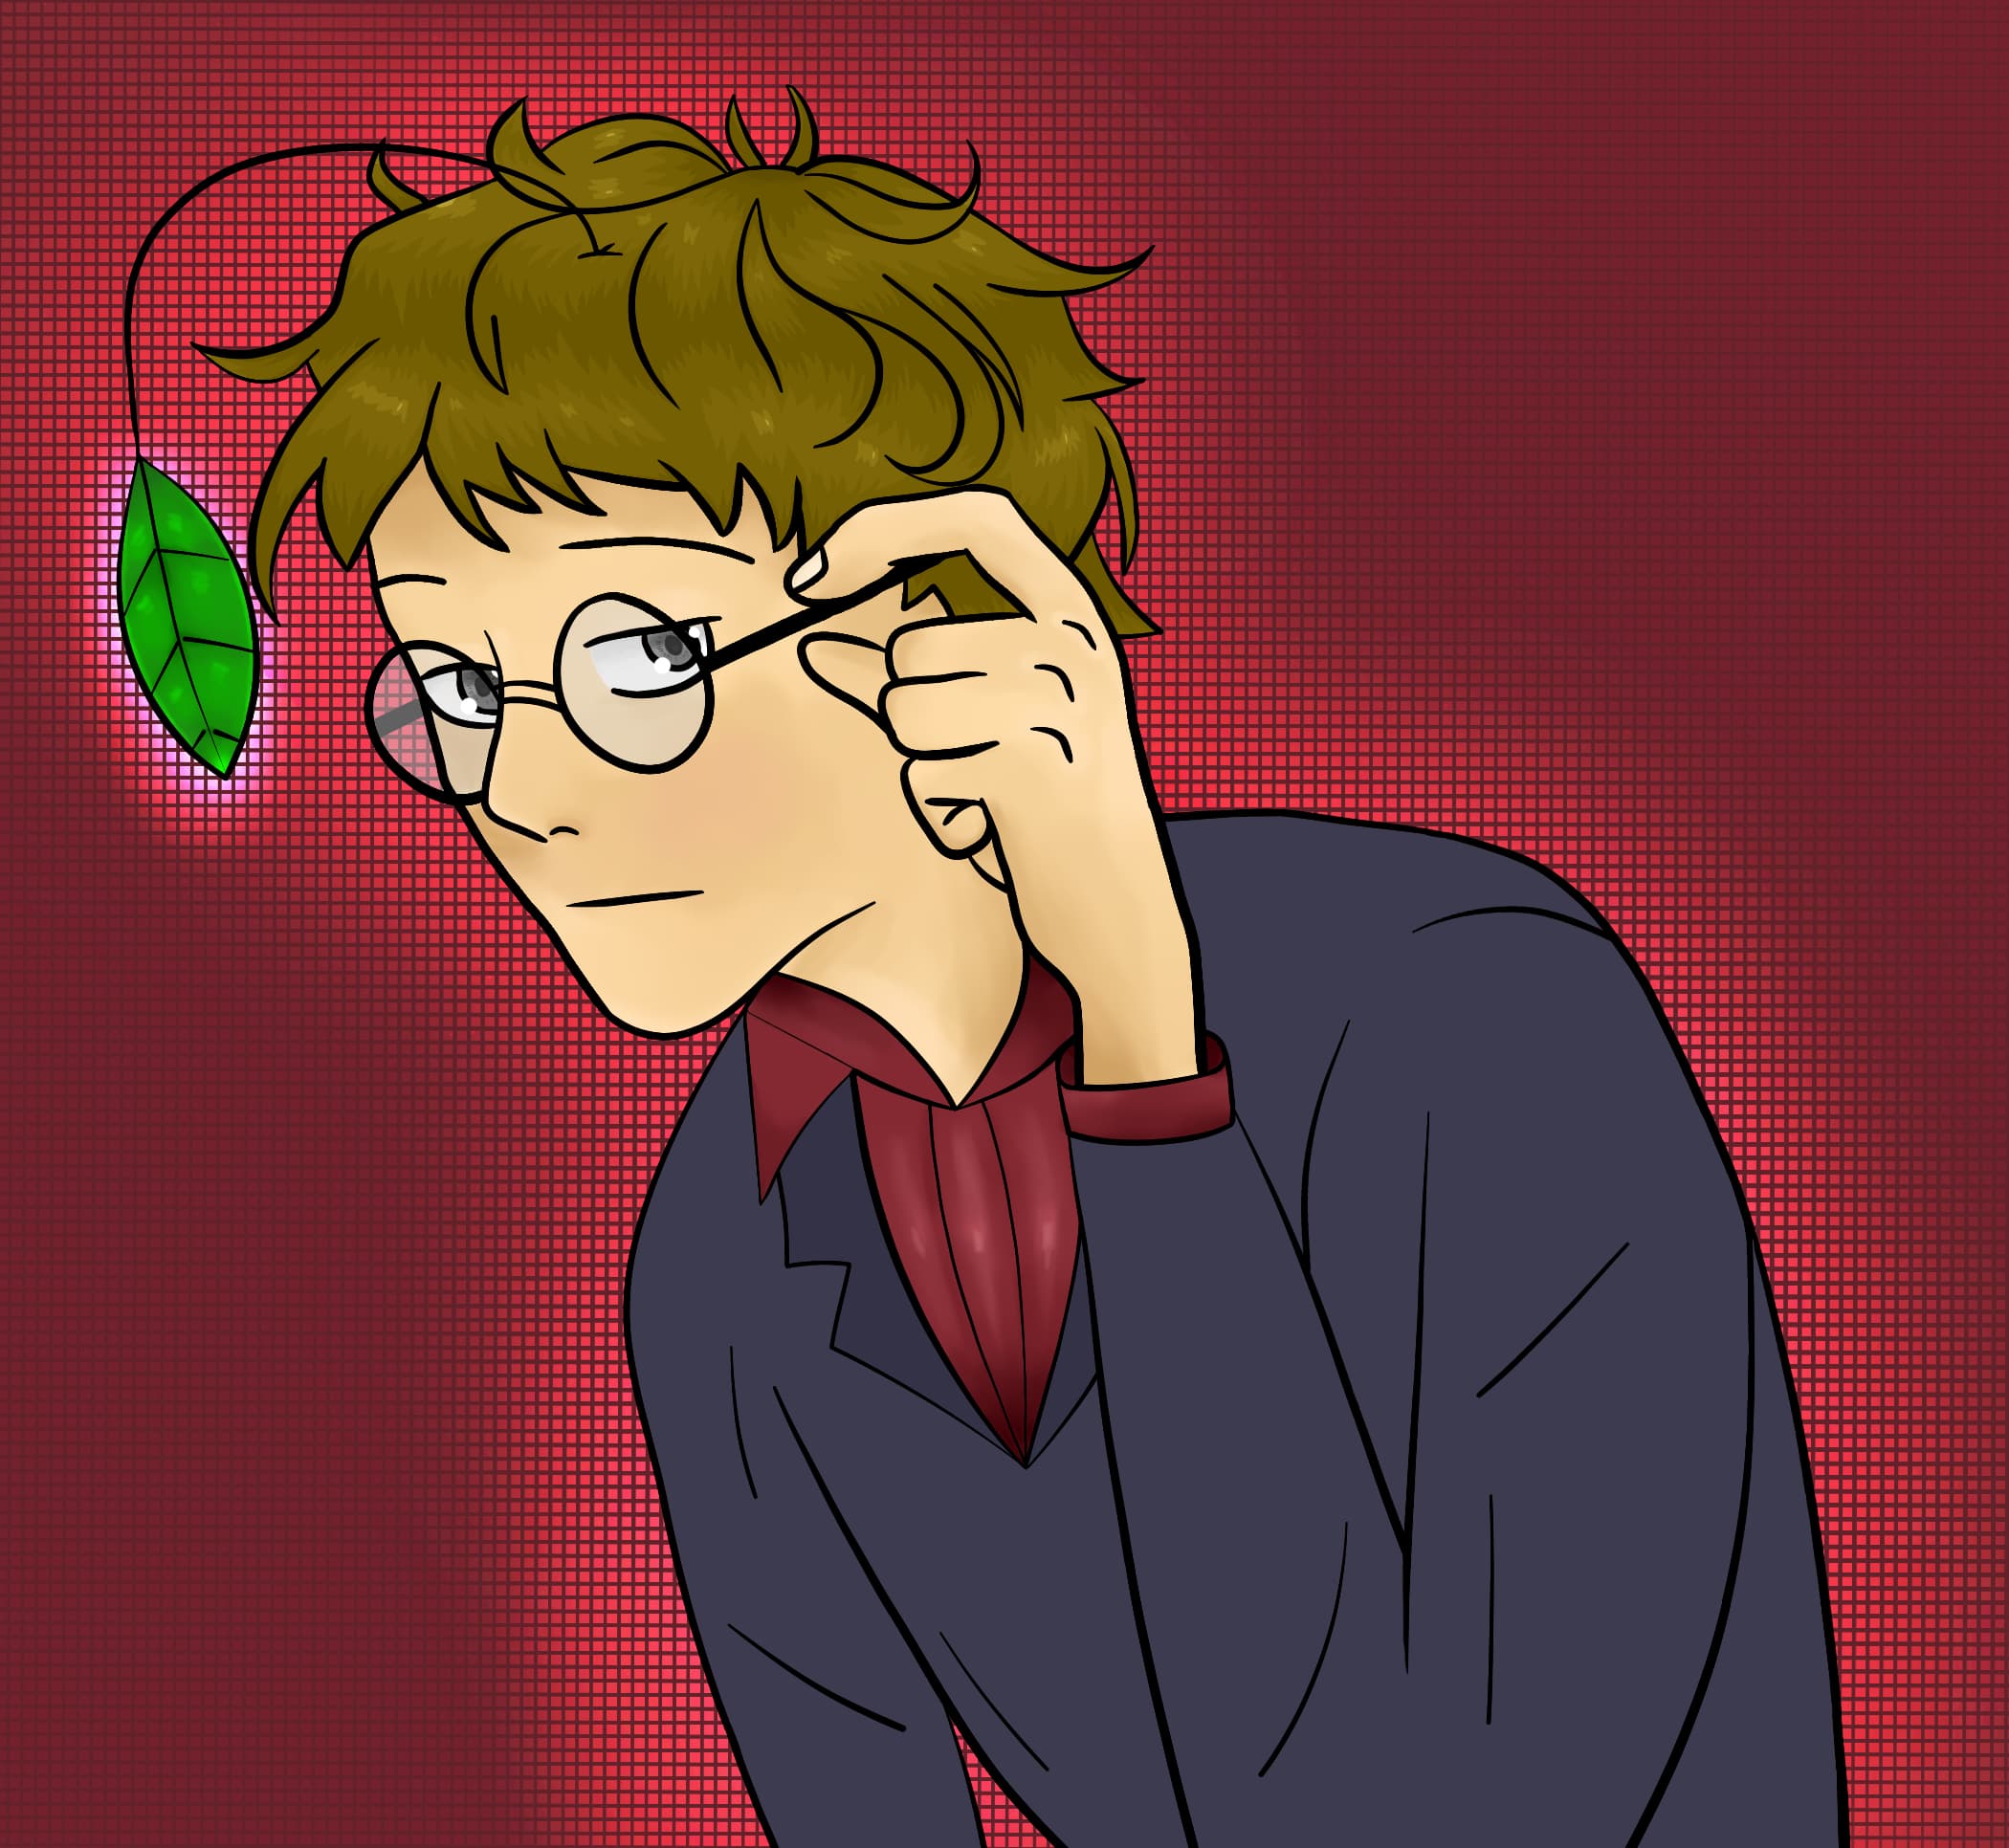 A portrait of a male-looking, bored, Helltaker-inspired character with his left hand adjusting his round glasses, over a dark red background. A basil leaf pokes out of the top of his head on a long shoot, like an anglerfish. He's wearing a bluish-black suit over a dark red collared shirt.